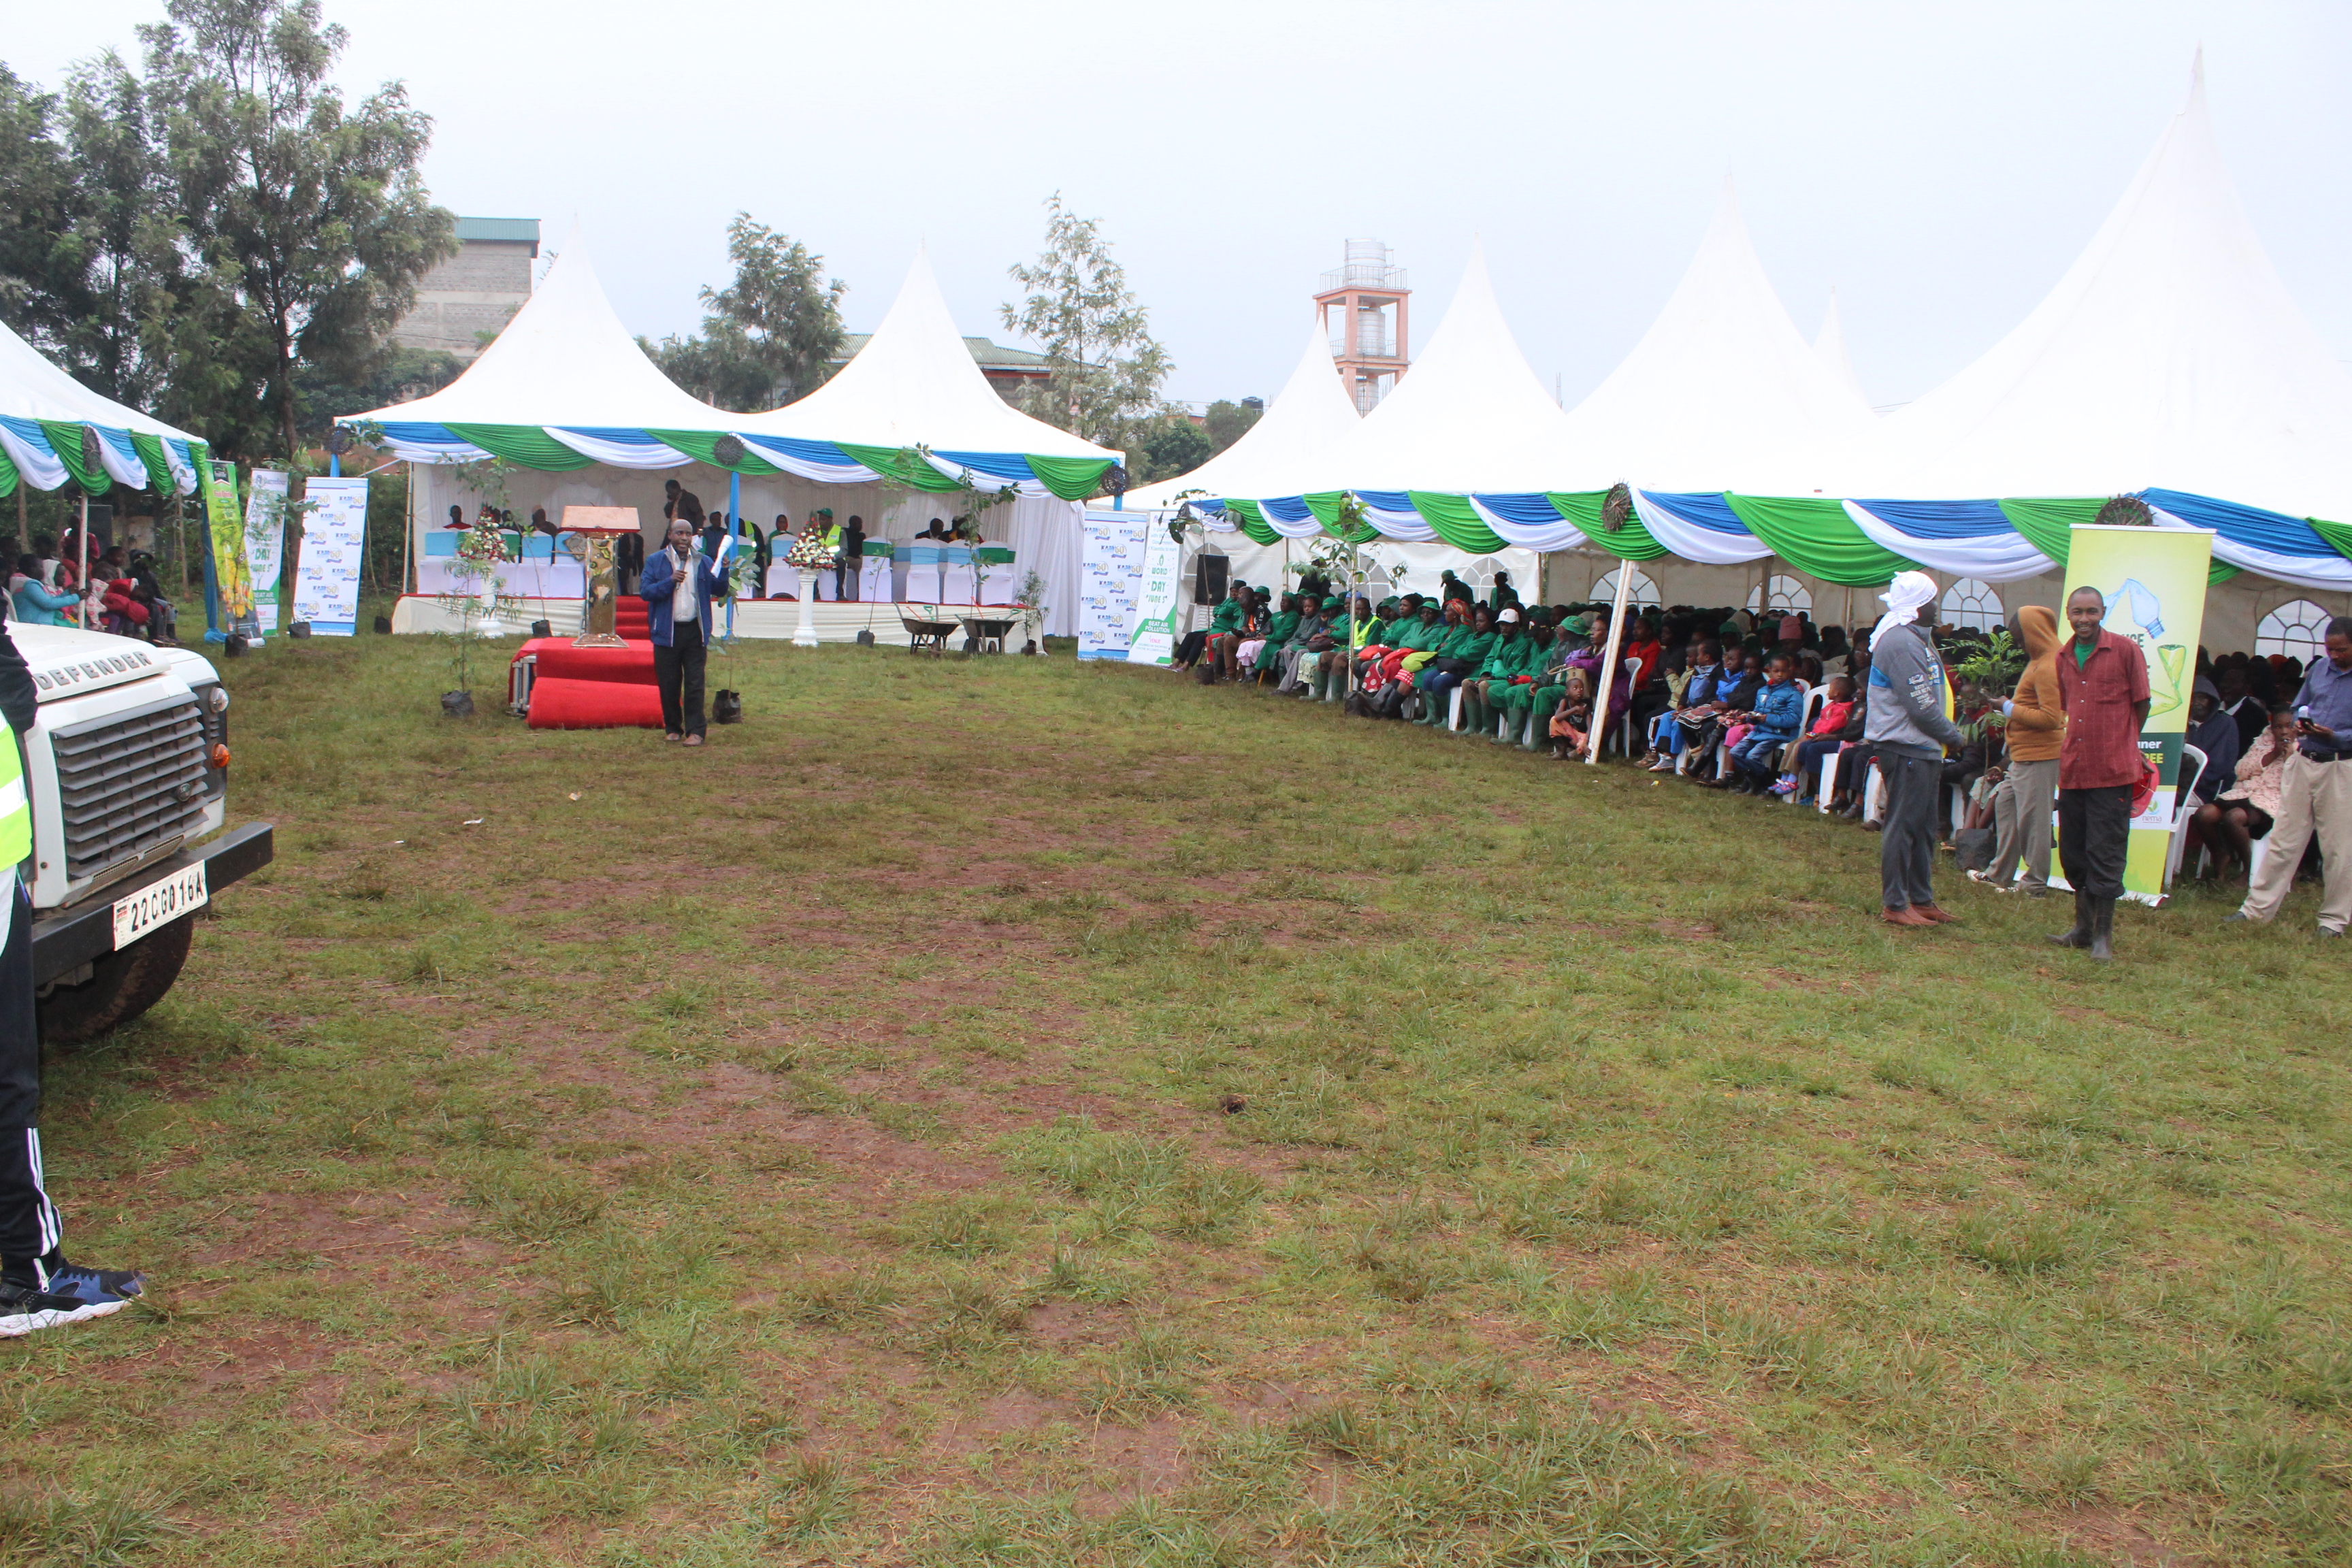 World Environment Day held on June 5, 2019 at the Wangari Maathai Green Campus after being flagged off at Uthiru Polytechnic.